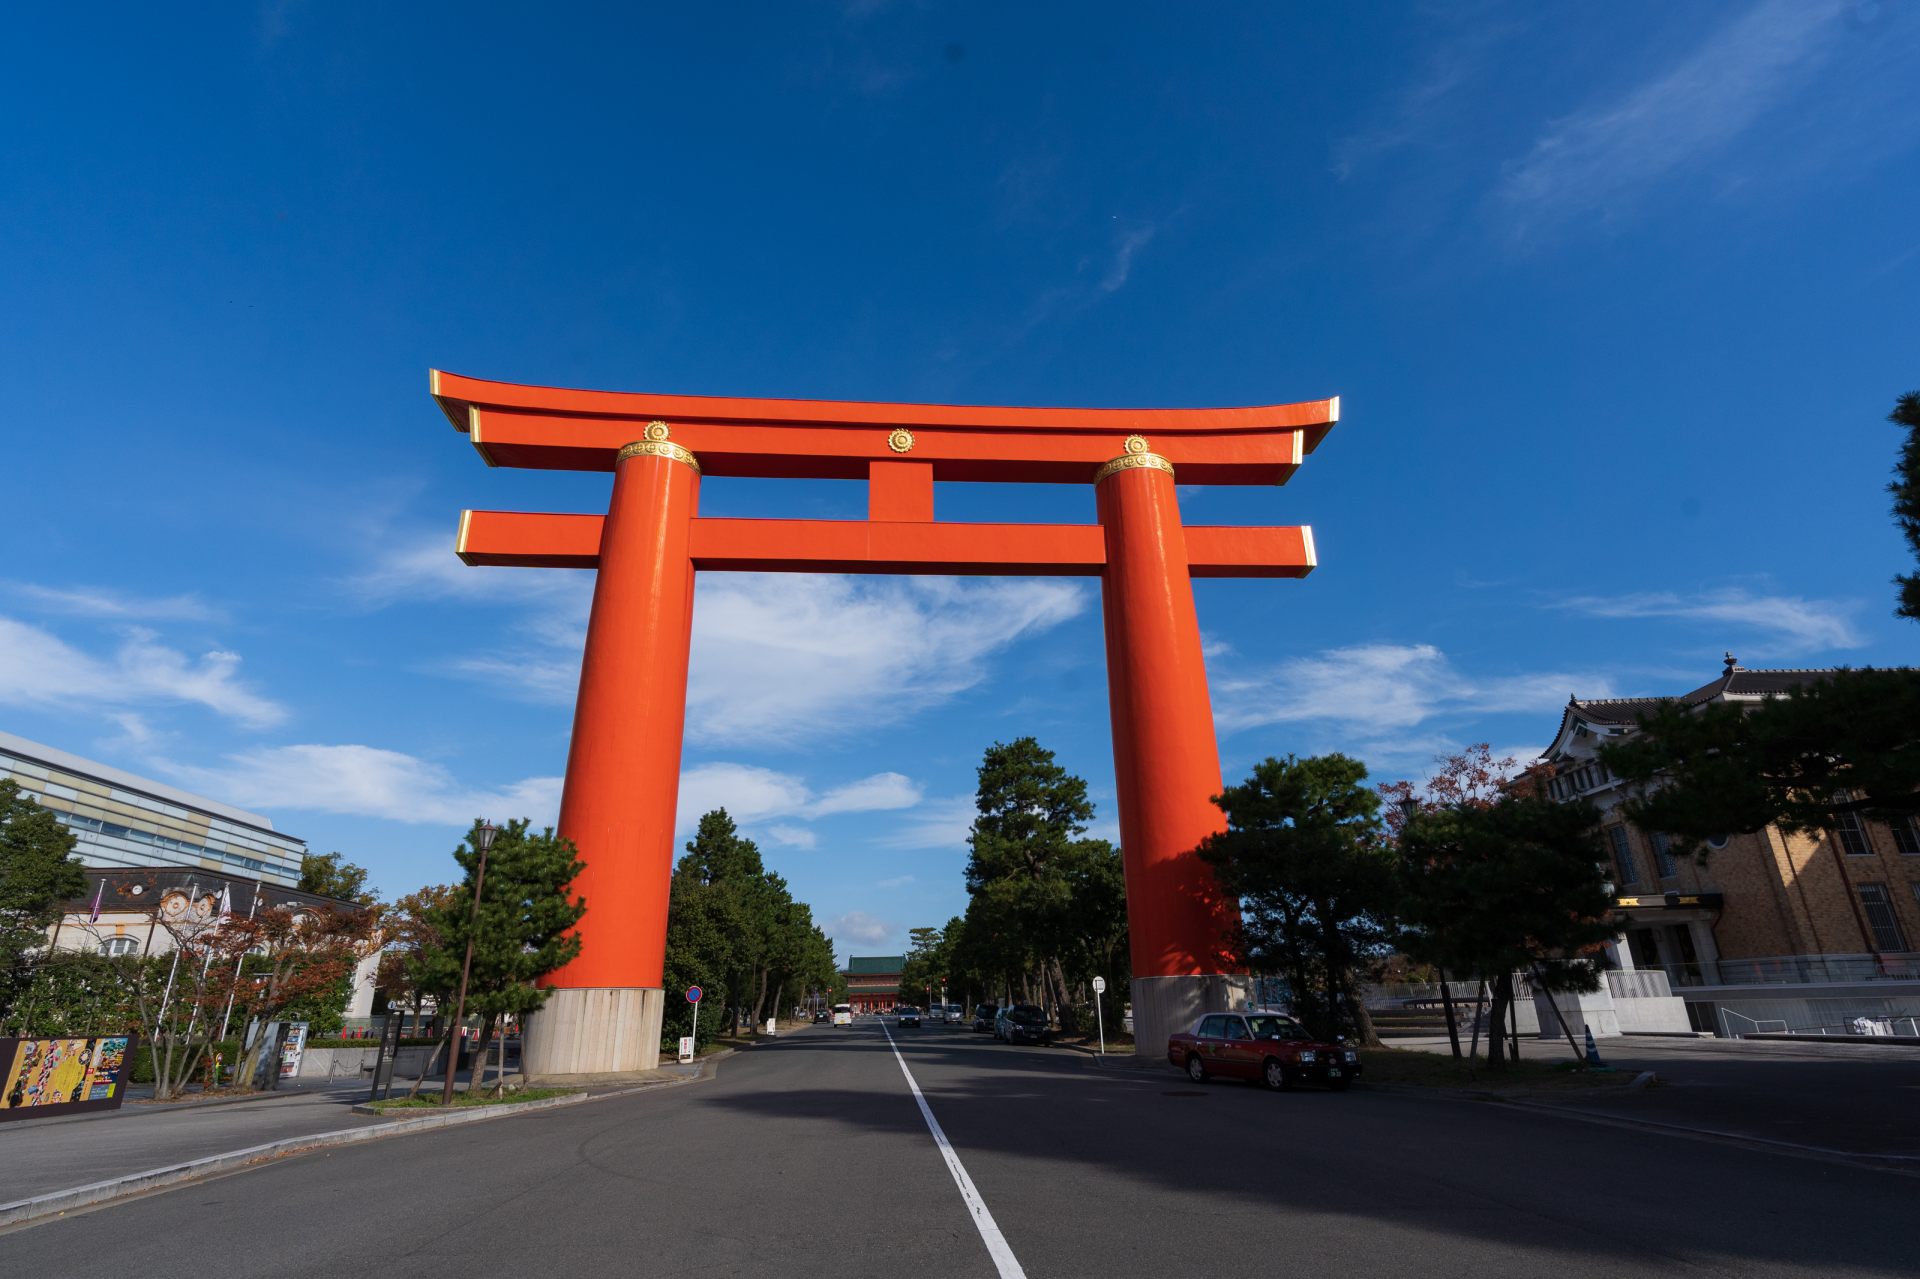 The huge vermilion torii gate, the biggest in Japan when it was built in 1929, is a local landmark.